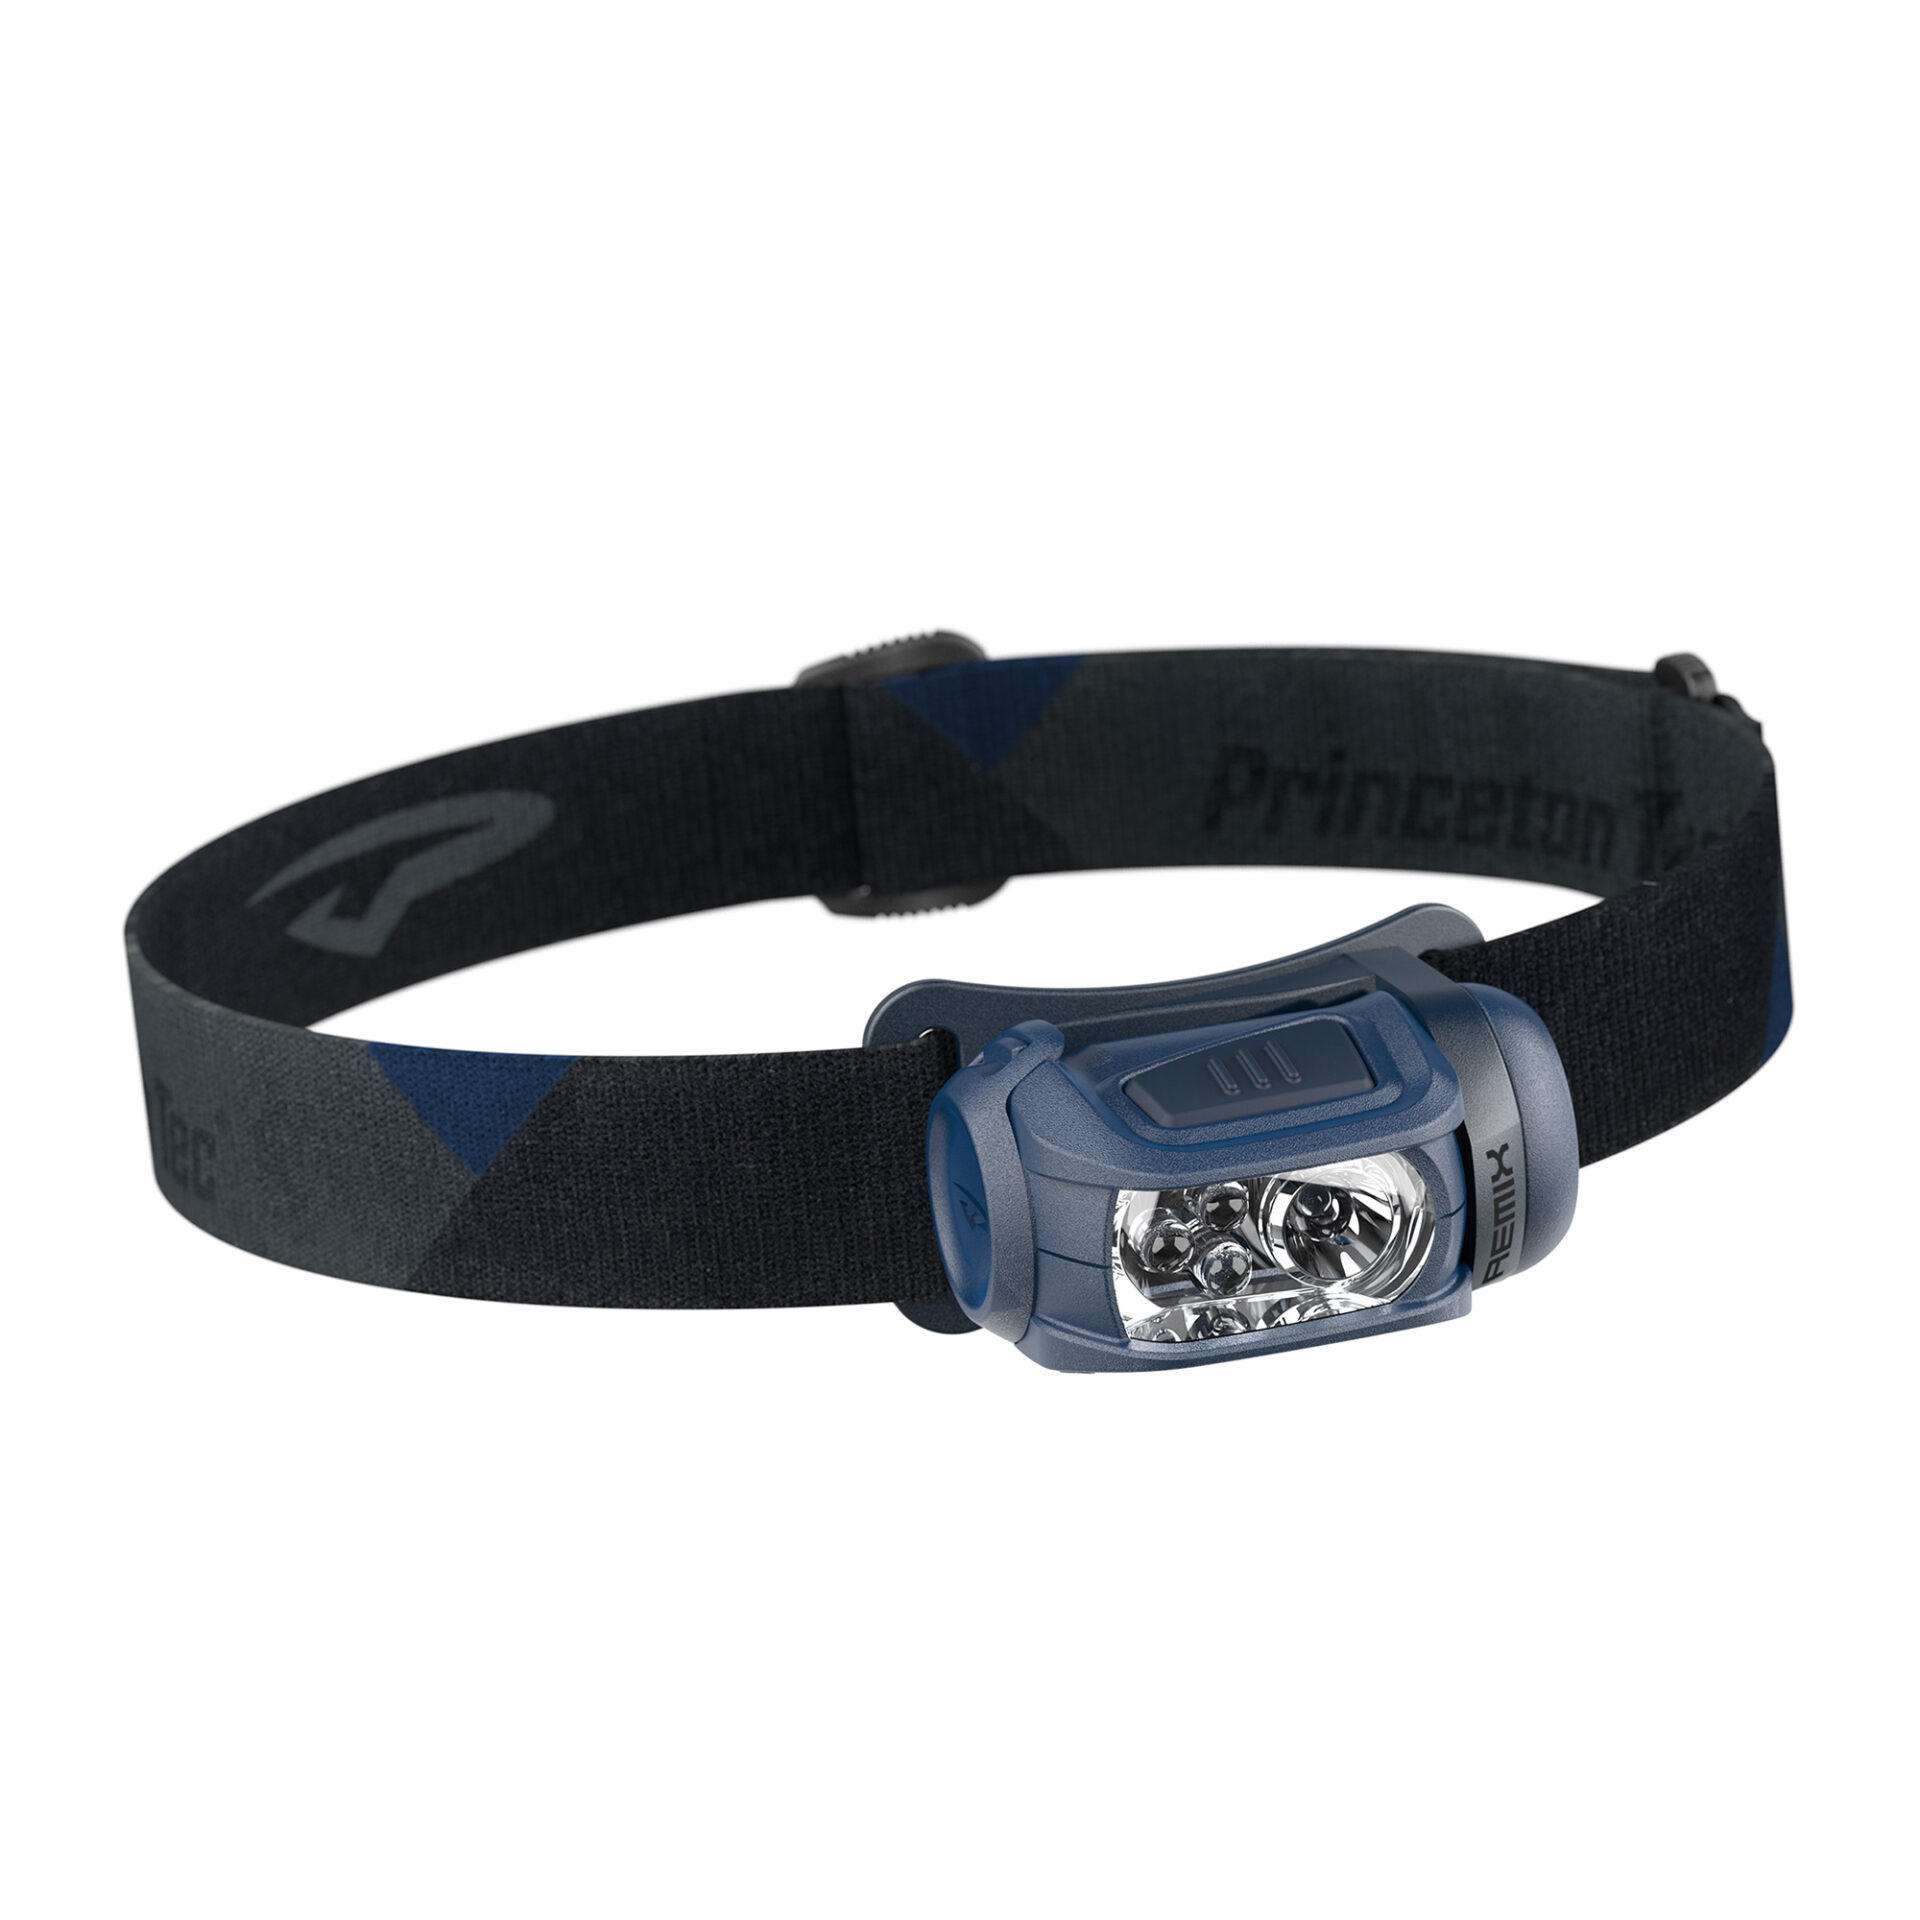 REMIX HEADLAMP is also available for sale